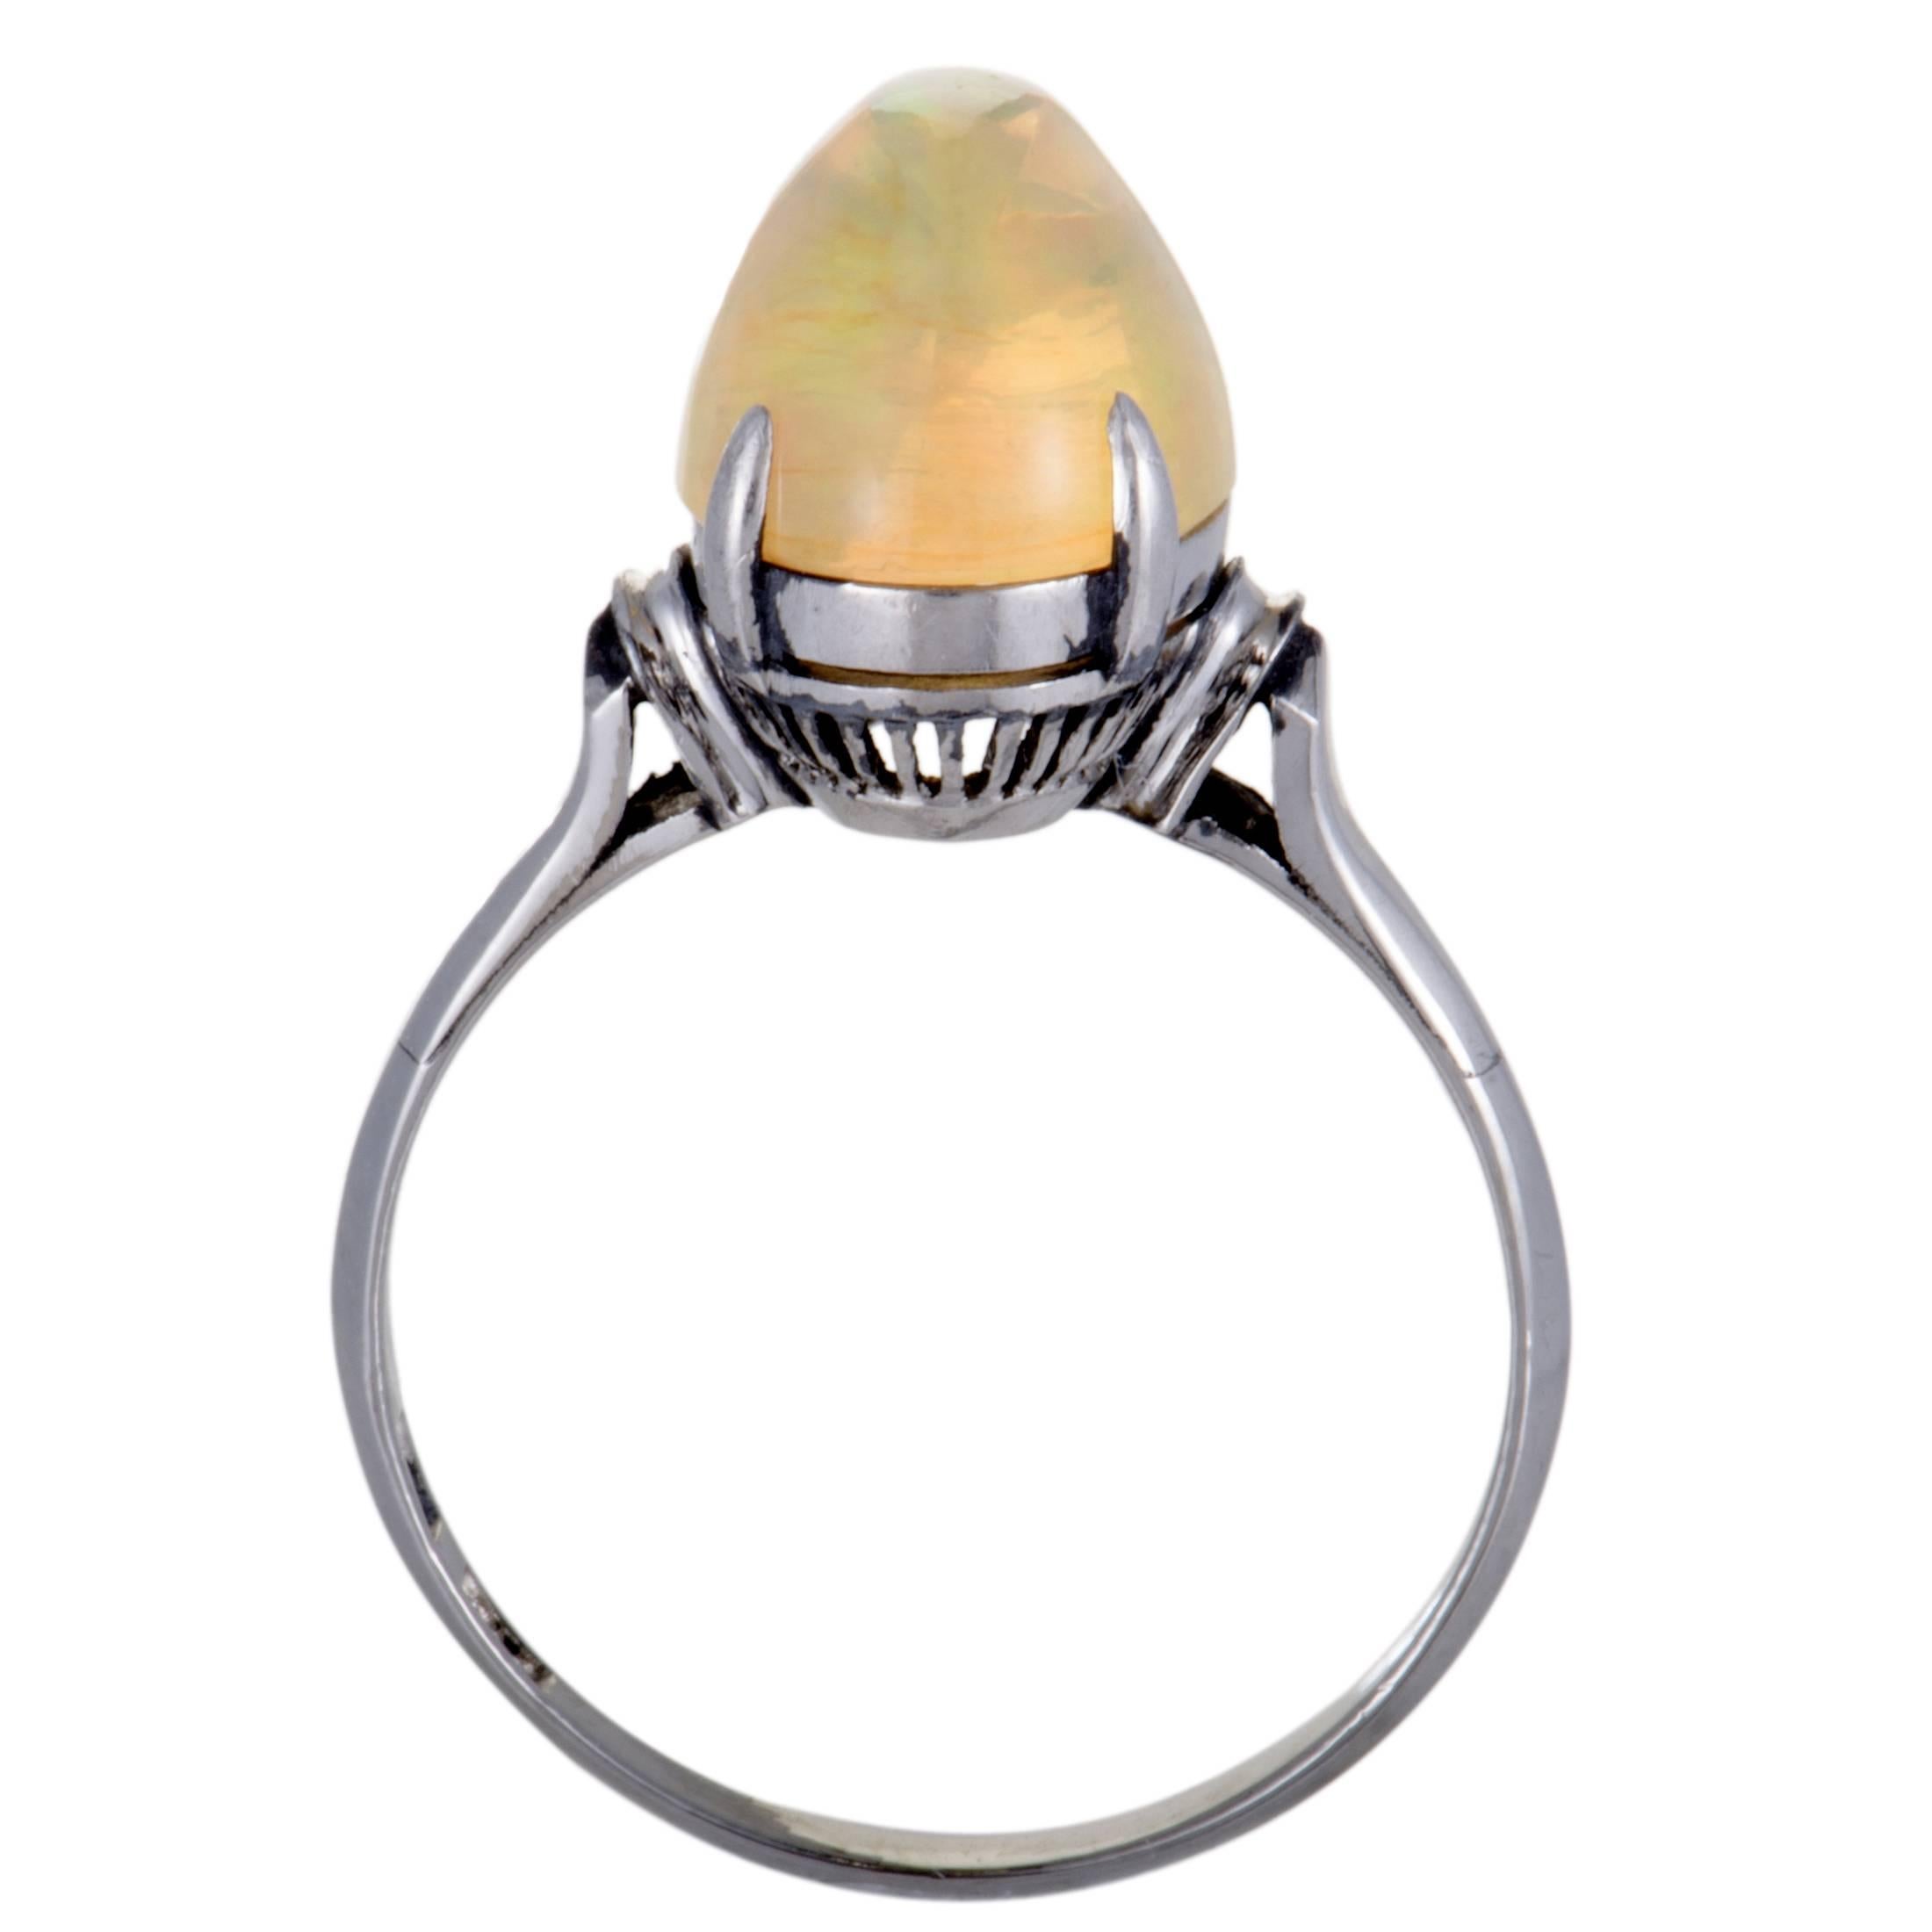 The fashionably unique design of this splendid ring boasts a nifty feel of prestigious elegance. The spectacular ring is made of shimmering platinum and is adorned in a captivating yellow fire opal that elevates the beauty of the fabulous